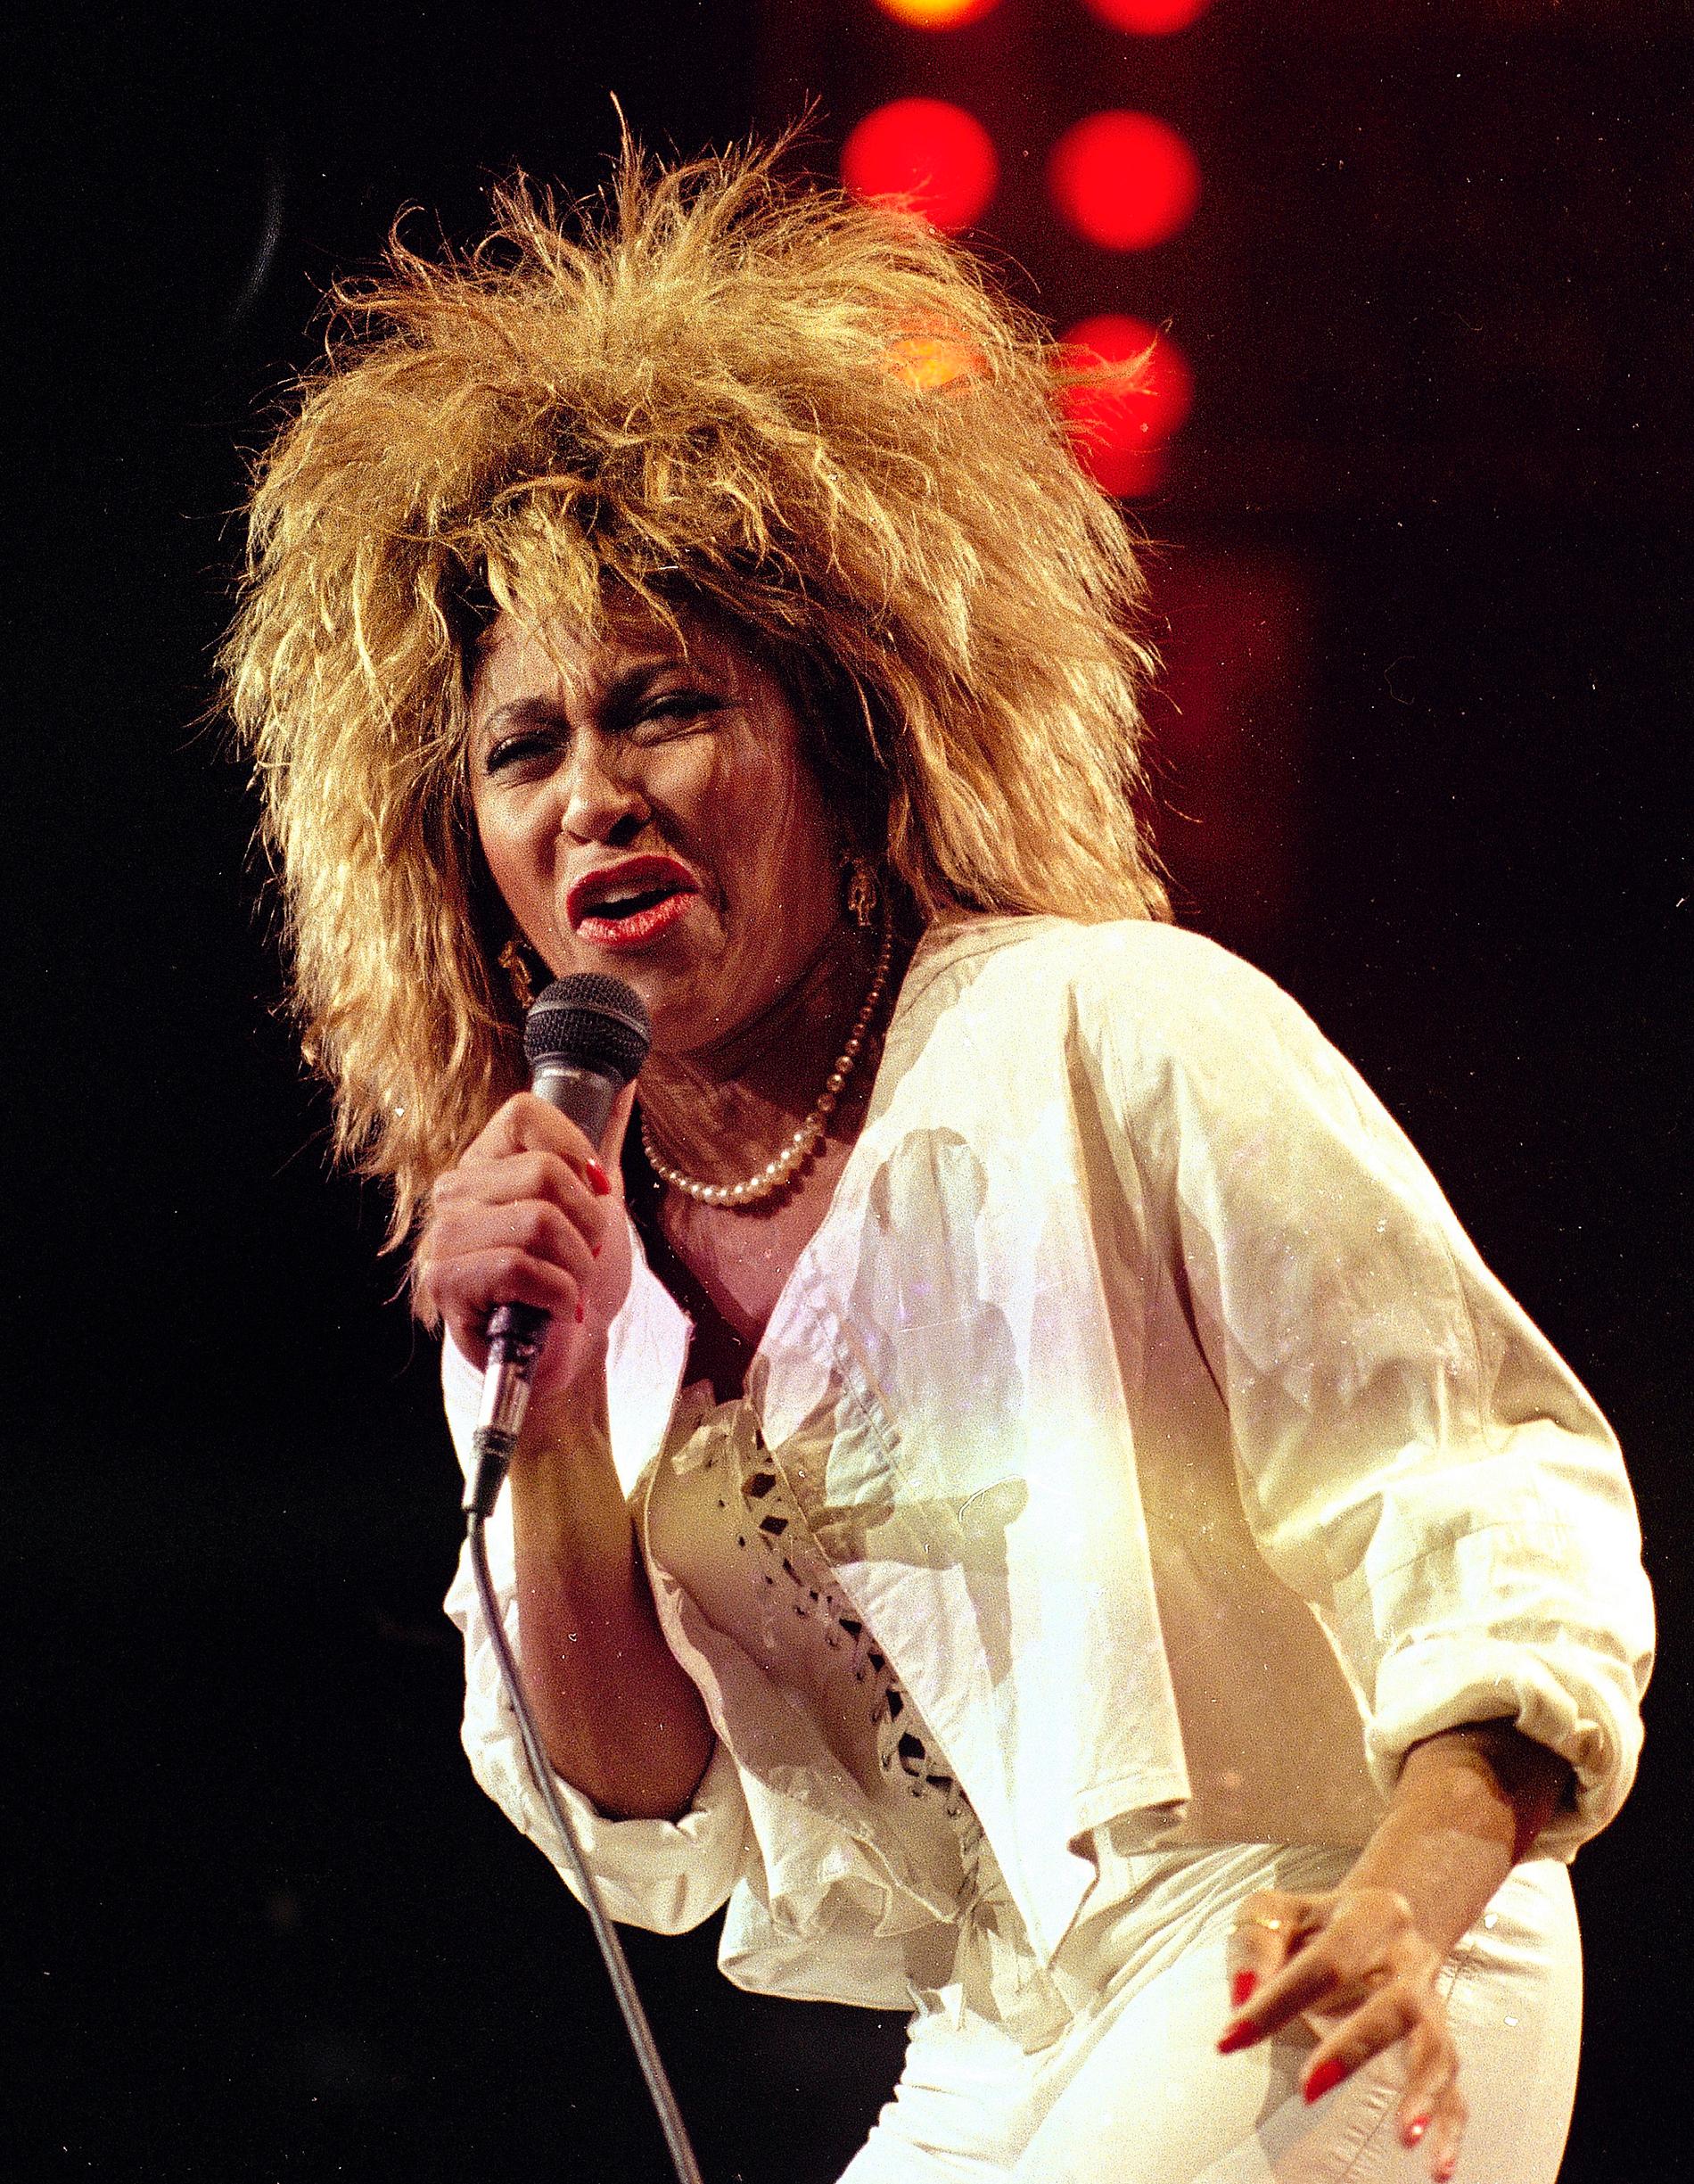 Celebrity tributes to Tina Turner: – Rest in peace